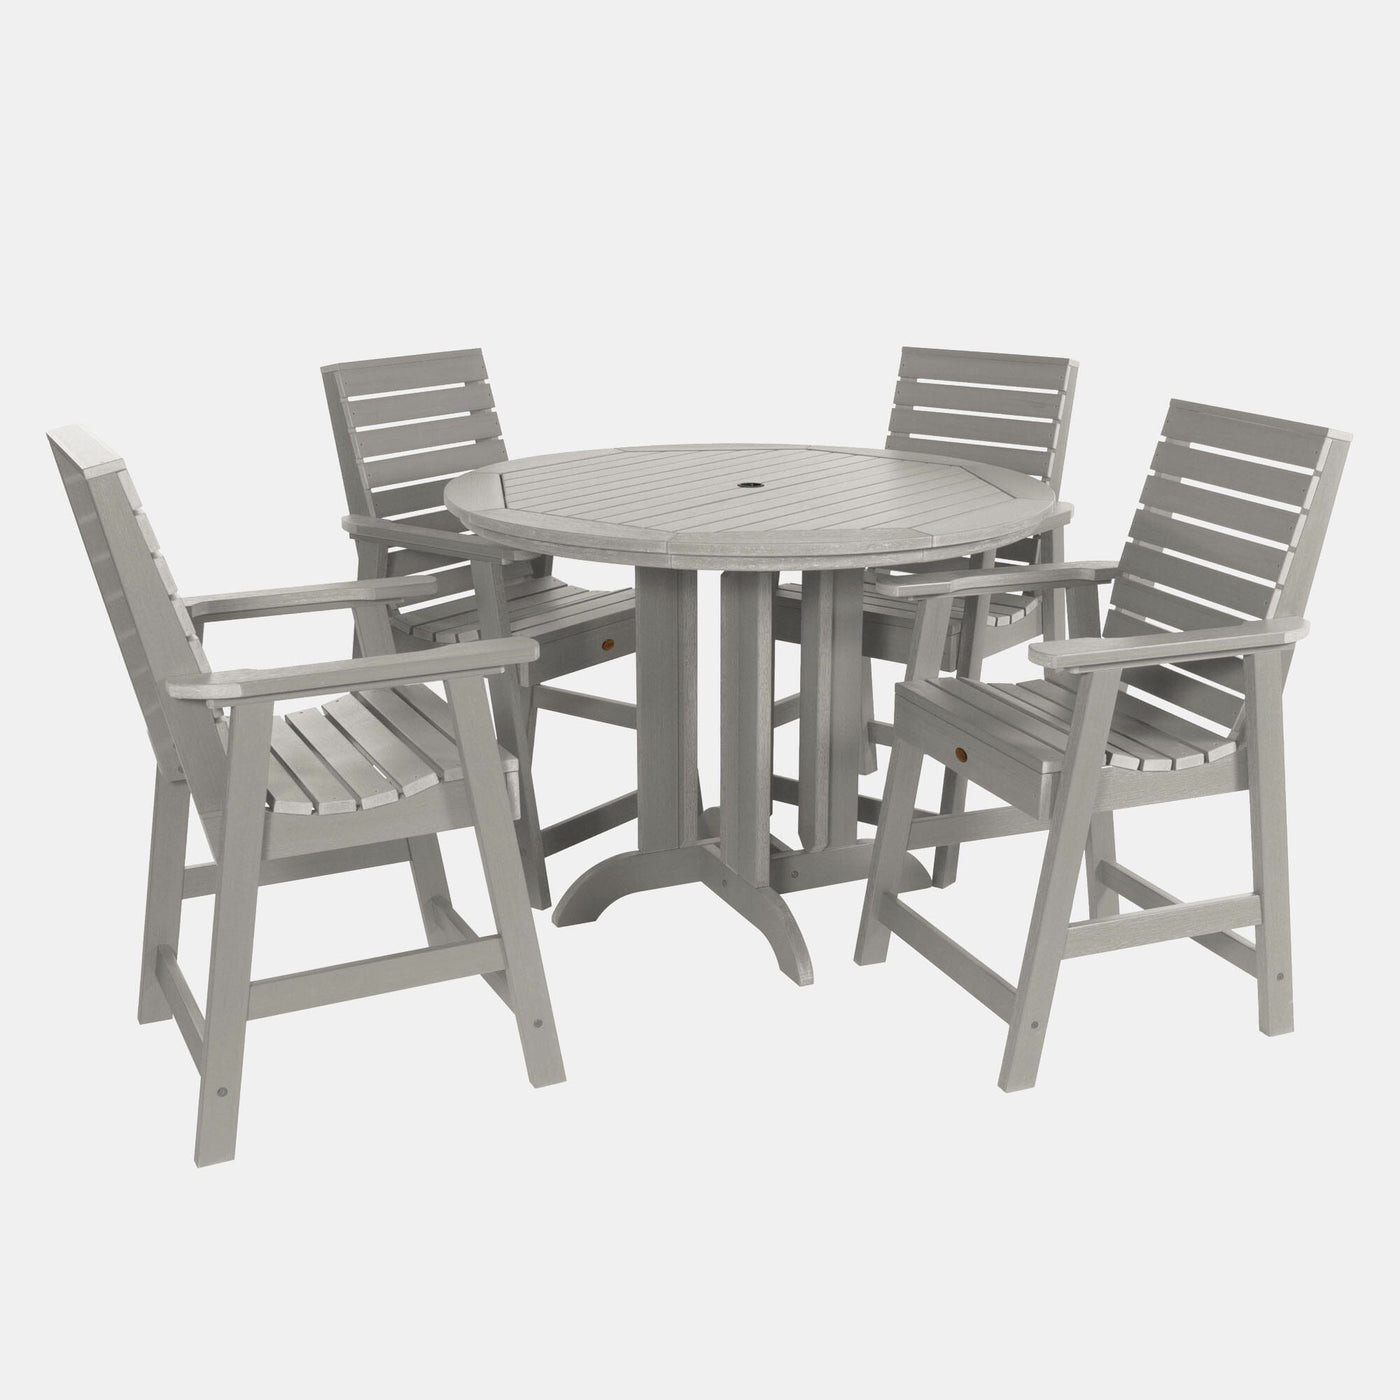 Weatherly 5pc 48in Round Dining Set - Counter Height Dining Highwood USA Harbor Gray 